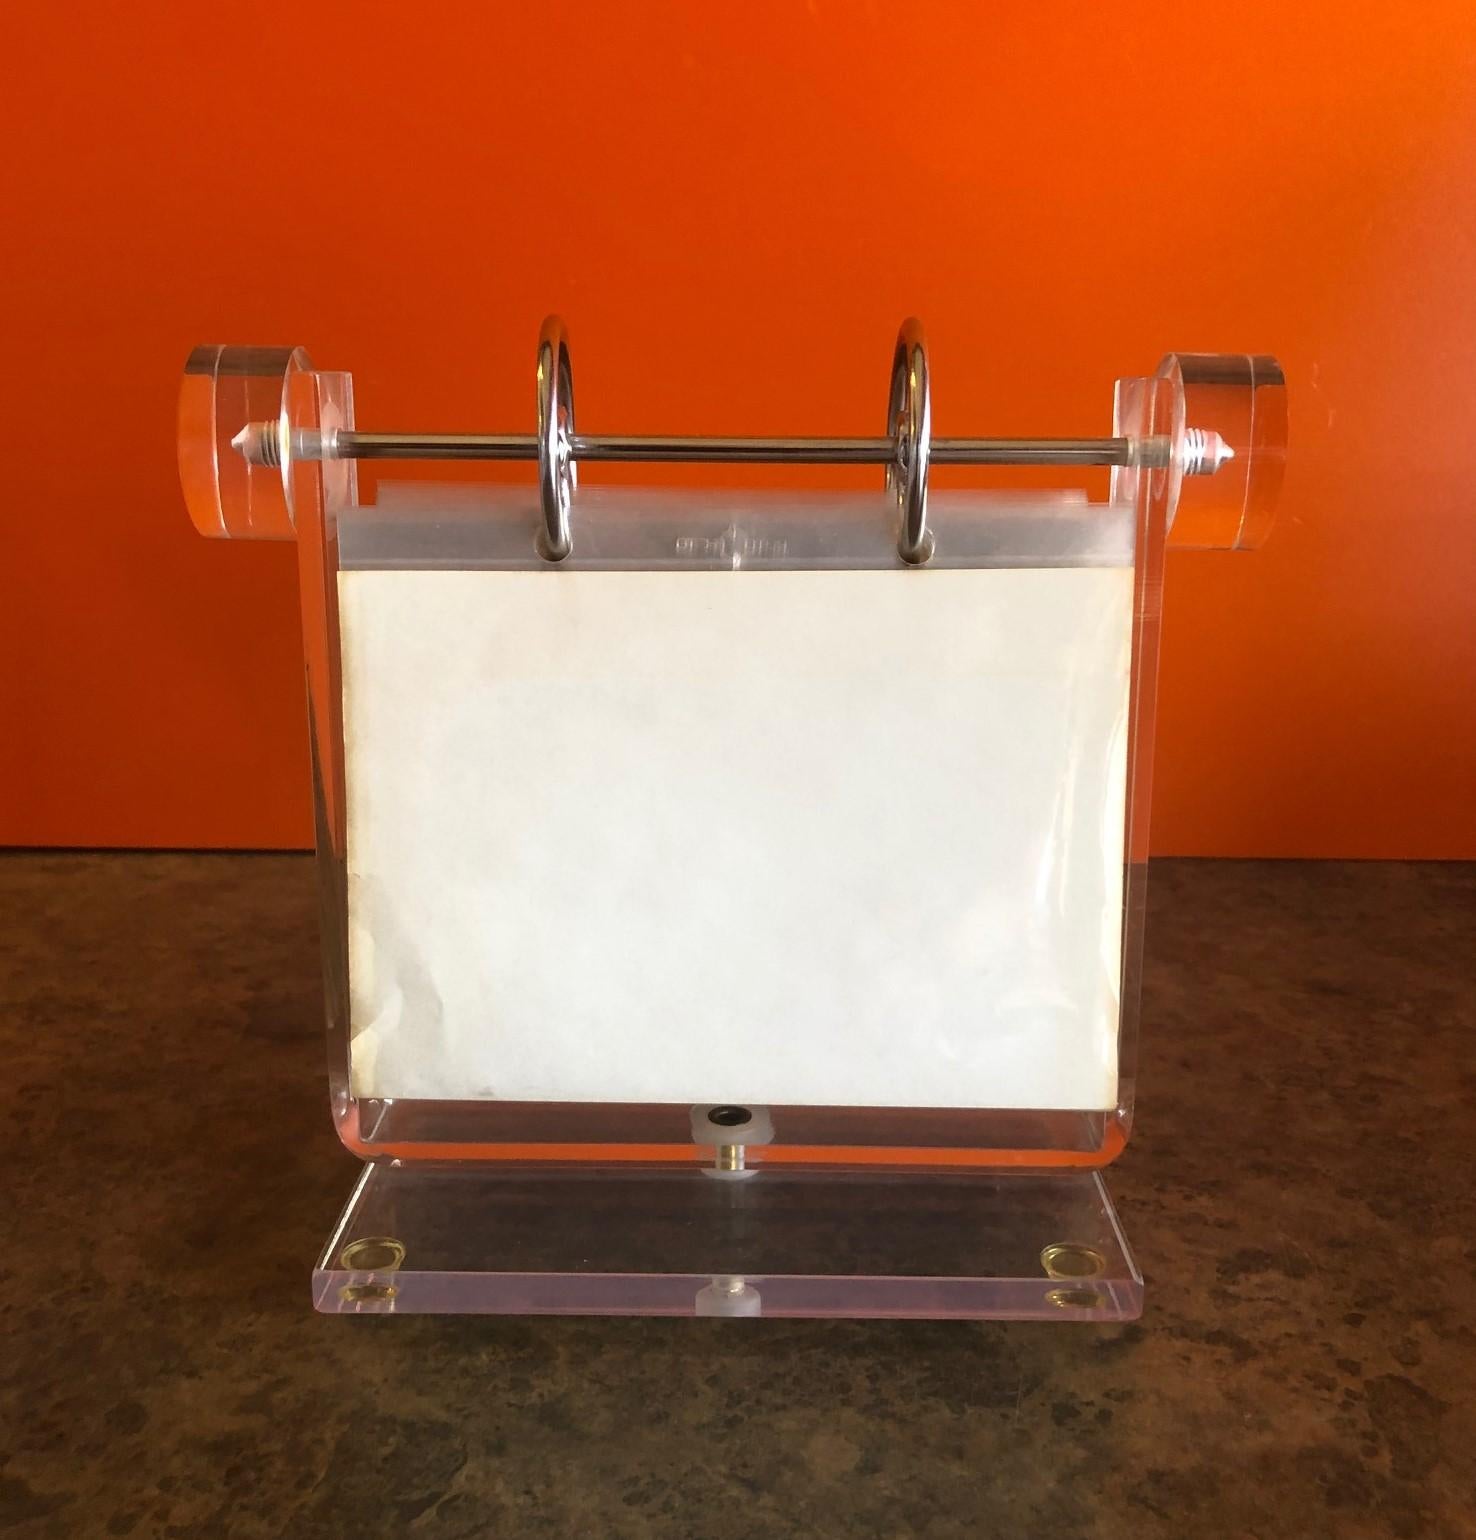 A very cool and hard to find MCM Lucite / acrylic clear photo display stand / rolodex frame with around 100 photo sleeves, circa 1970s. Would be a great personalized (can hold approximately 200 of your photographs) accent piece for any MCM room or